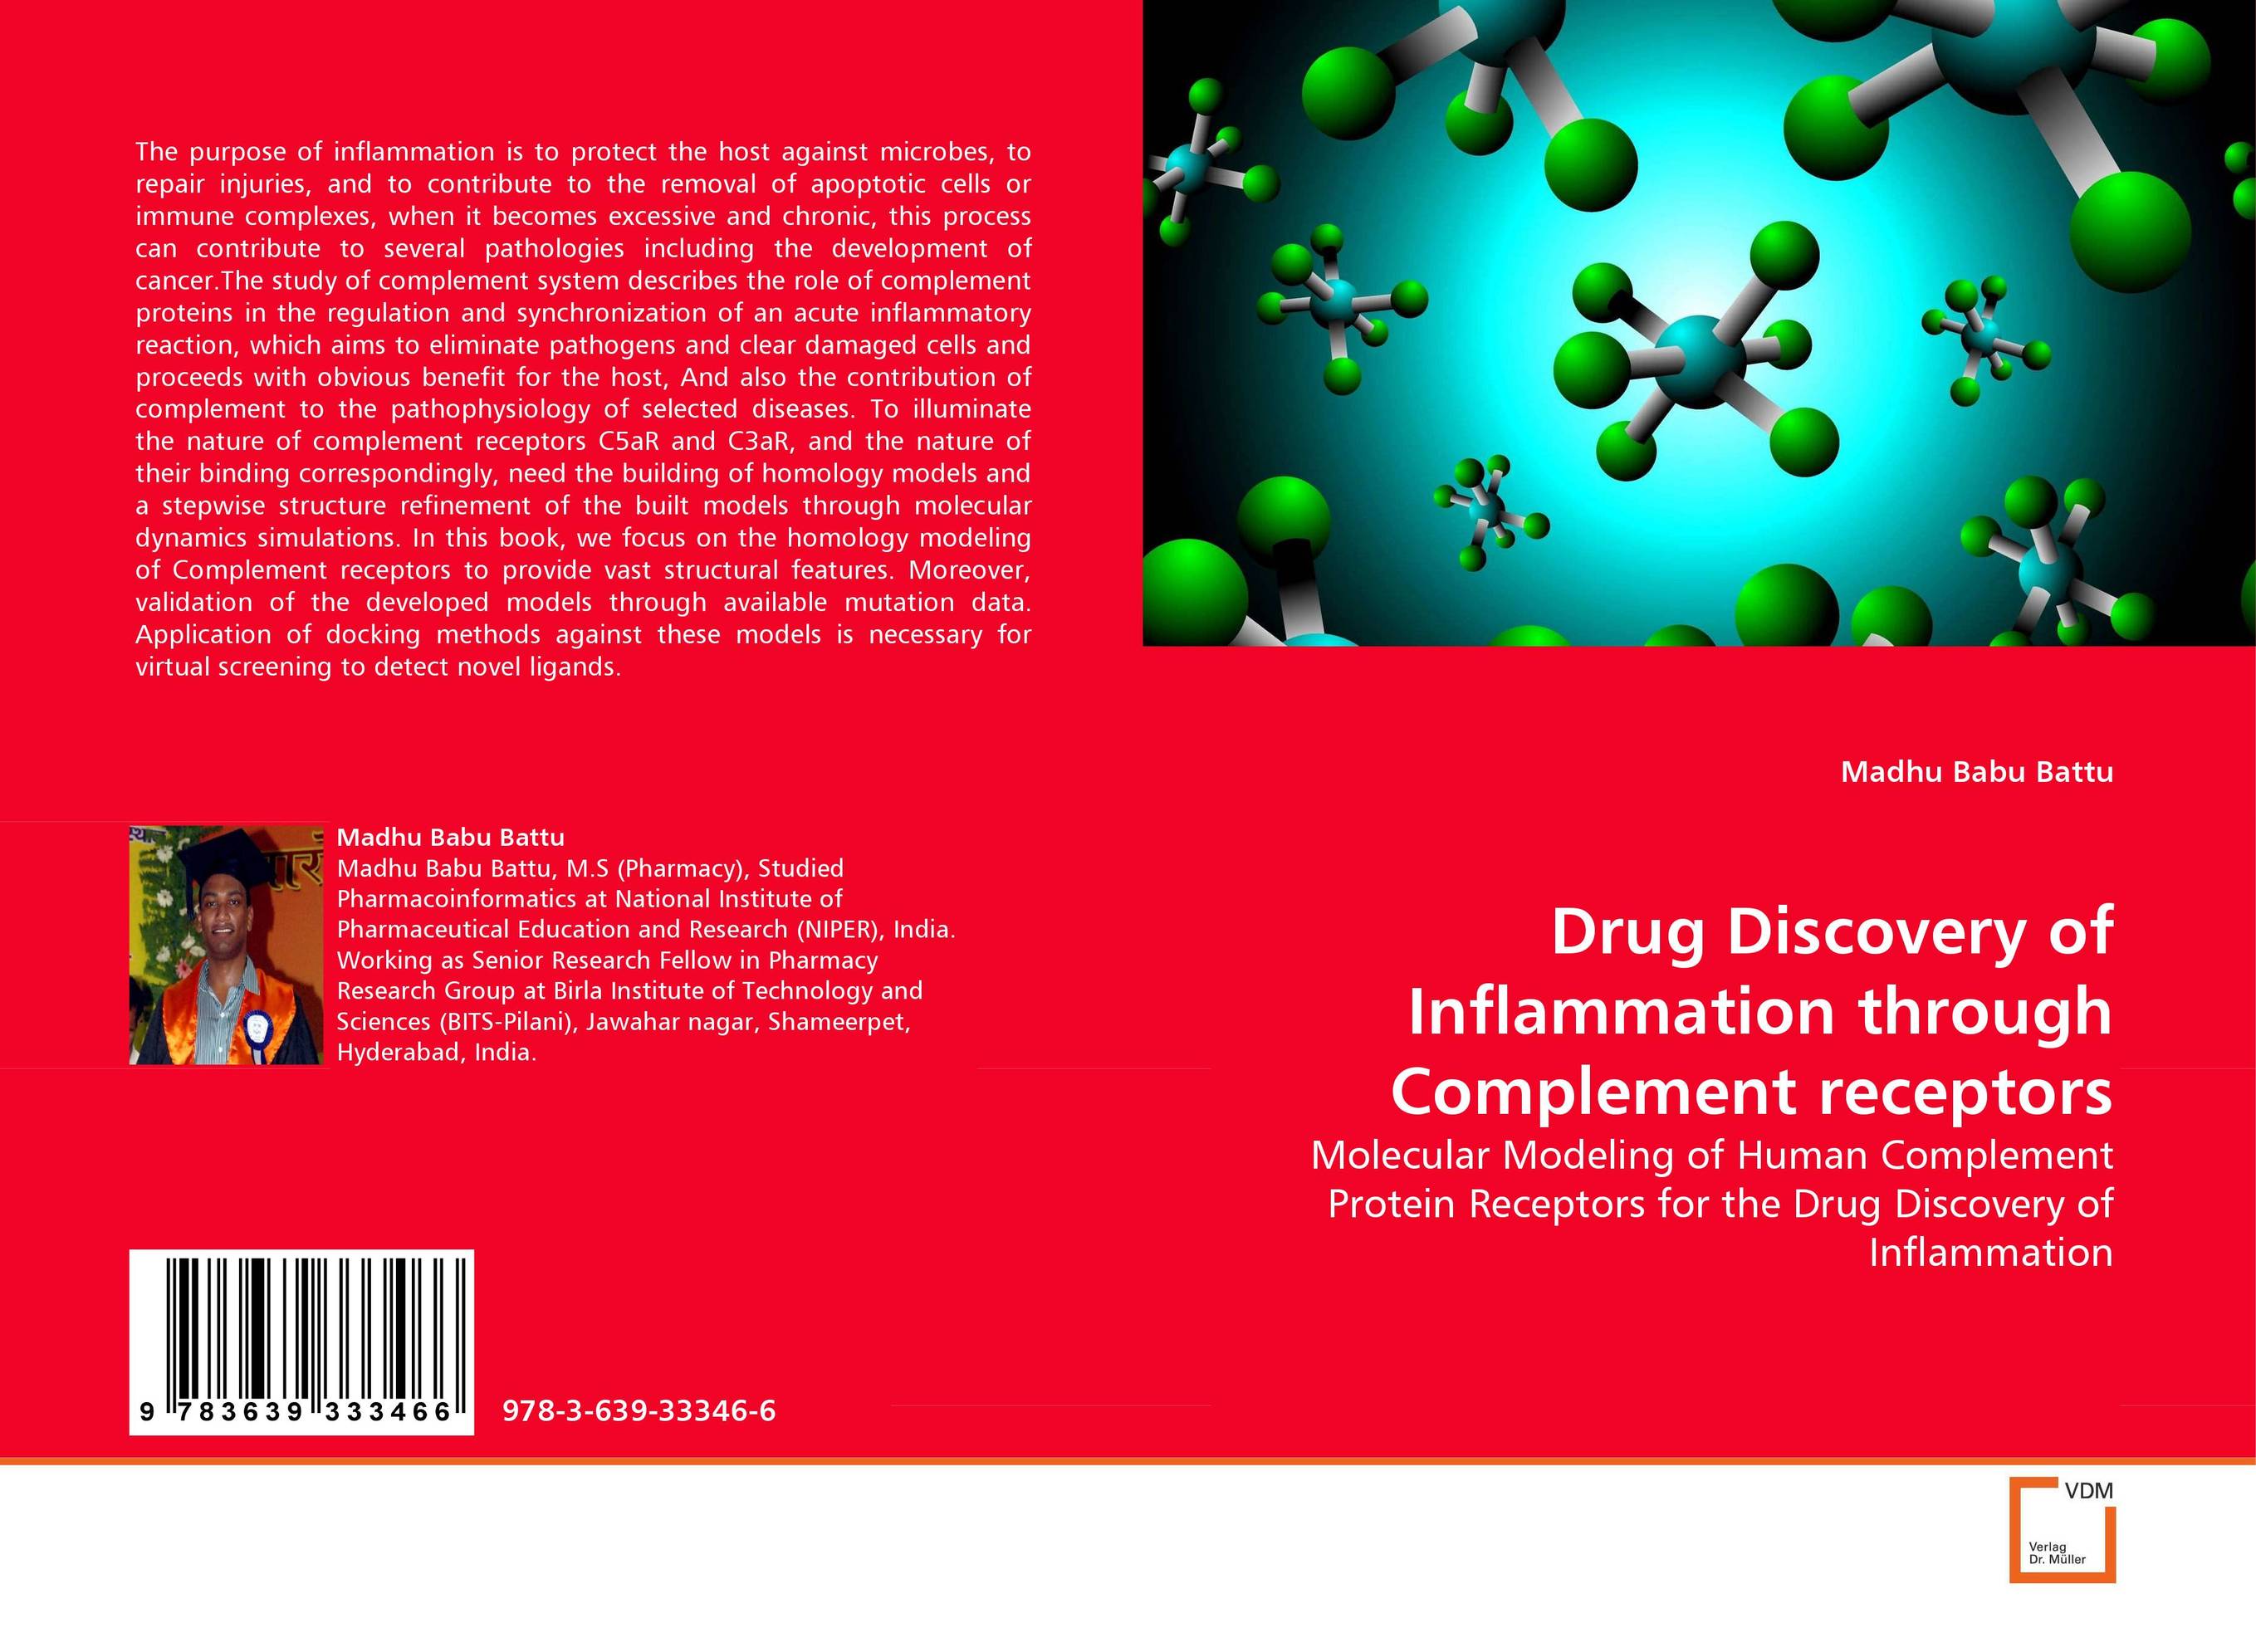 Drug Discovery of Inflammation through Complement receptors